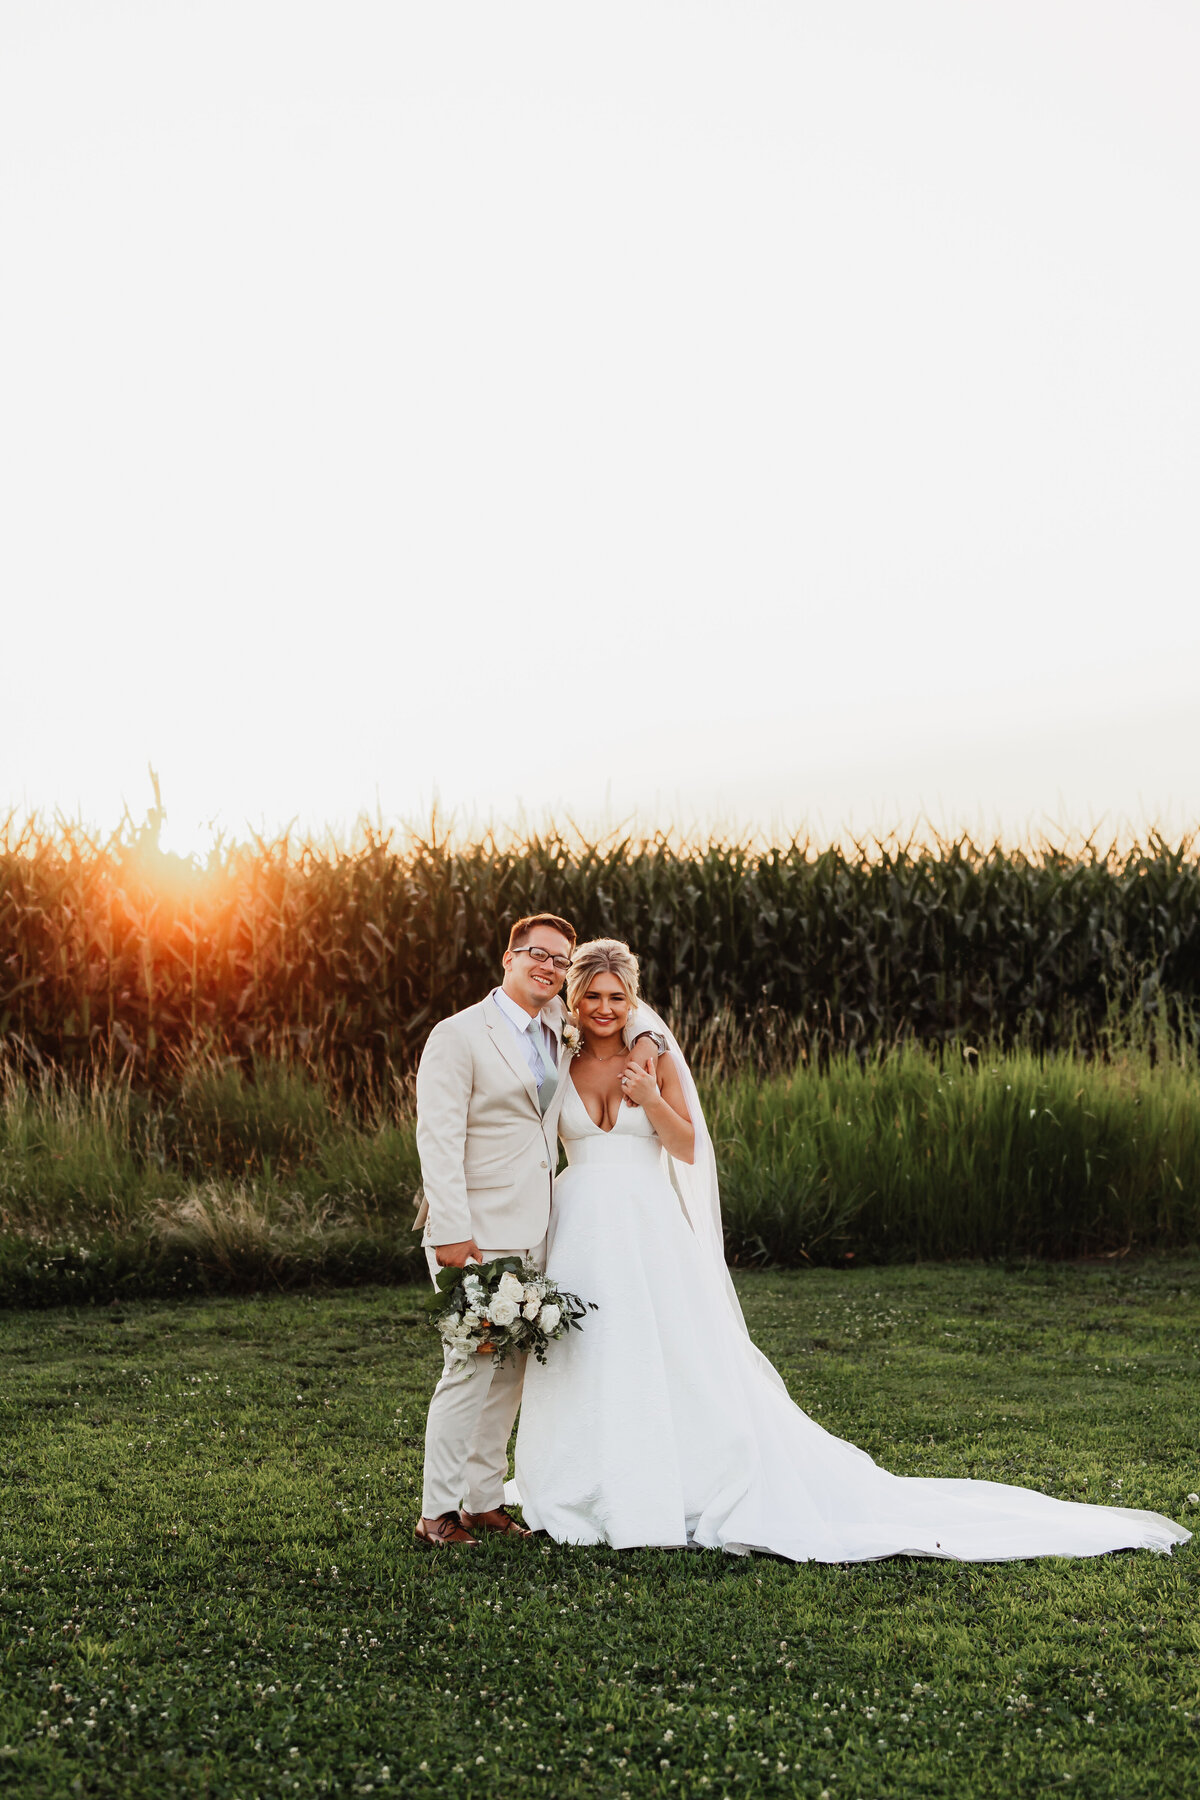 A couples portrait on their wedding day in front of a corn field.